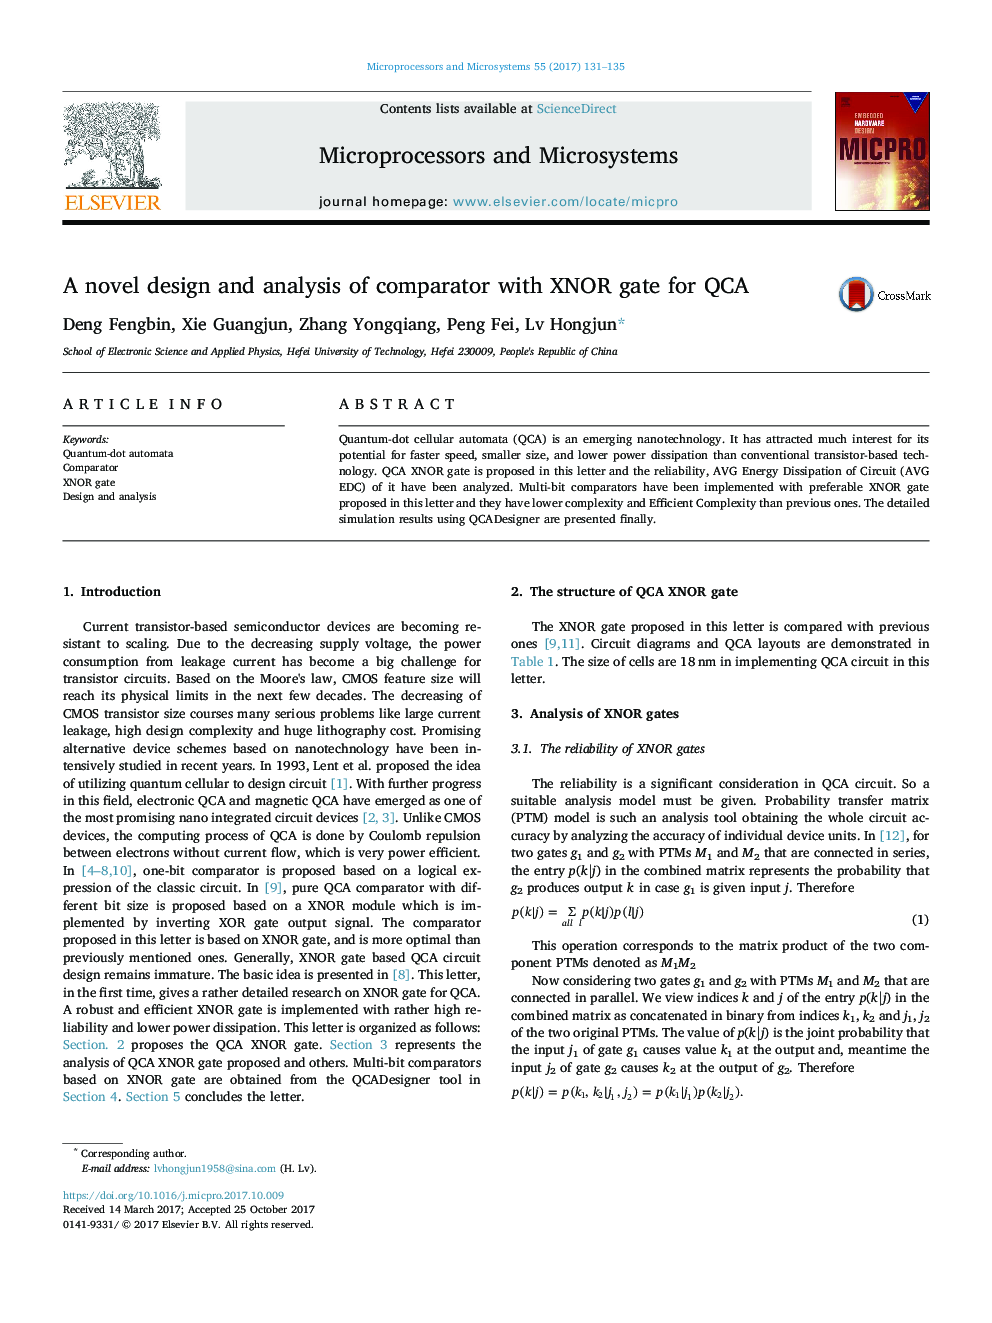 A novel design and analysis of comparator with XNOR gate for QCA